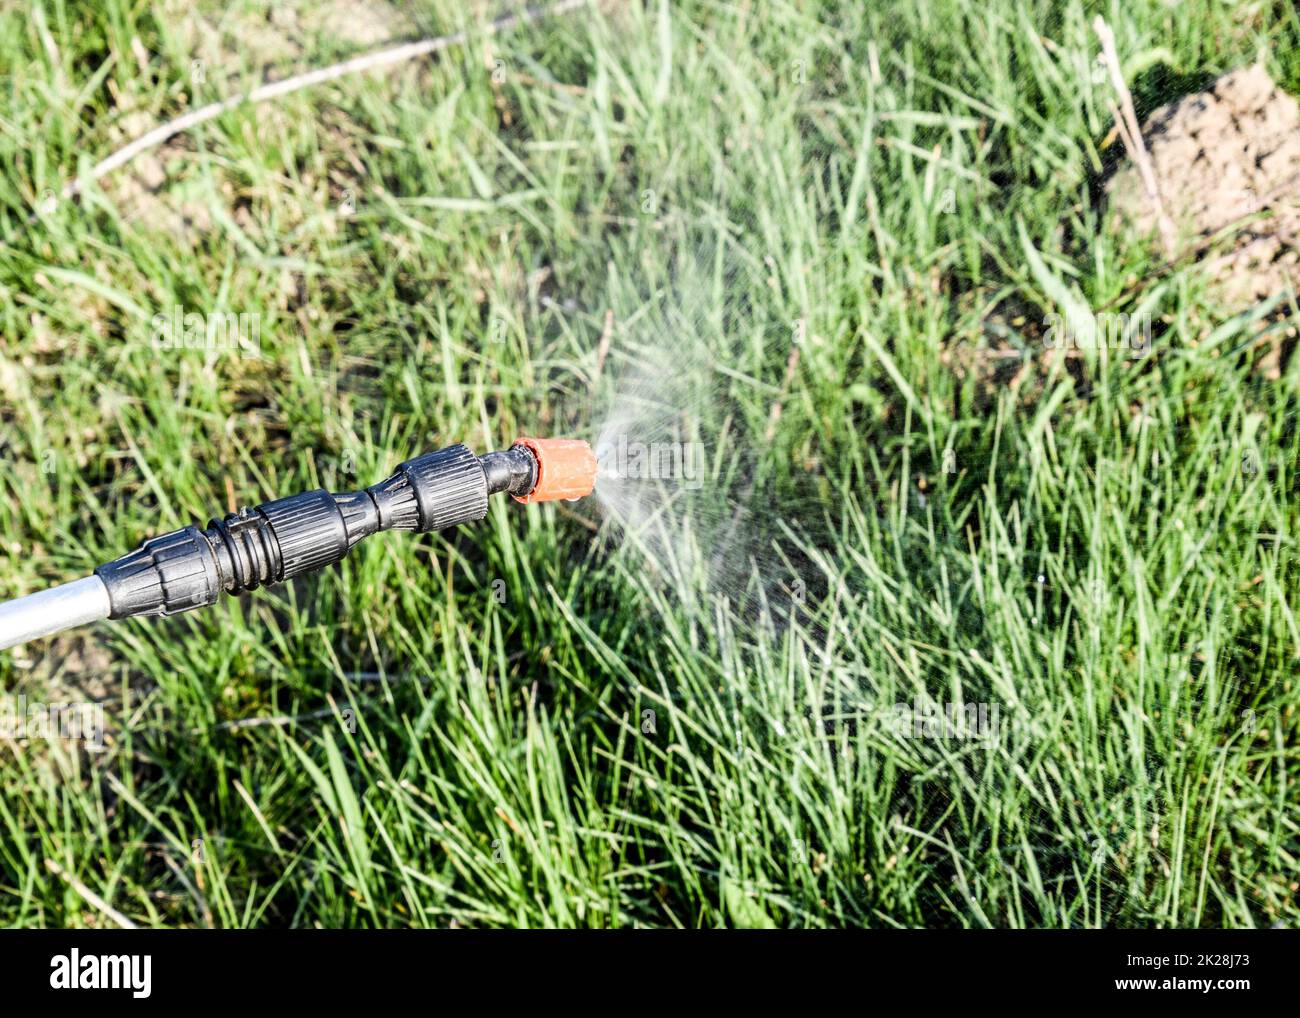 Spraying herbicide from the nozzle of the sprayer manual Stock Photo